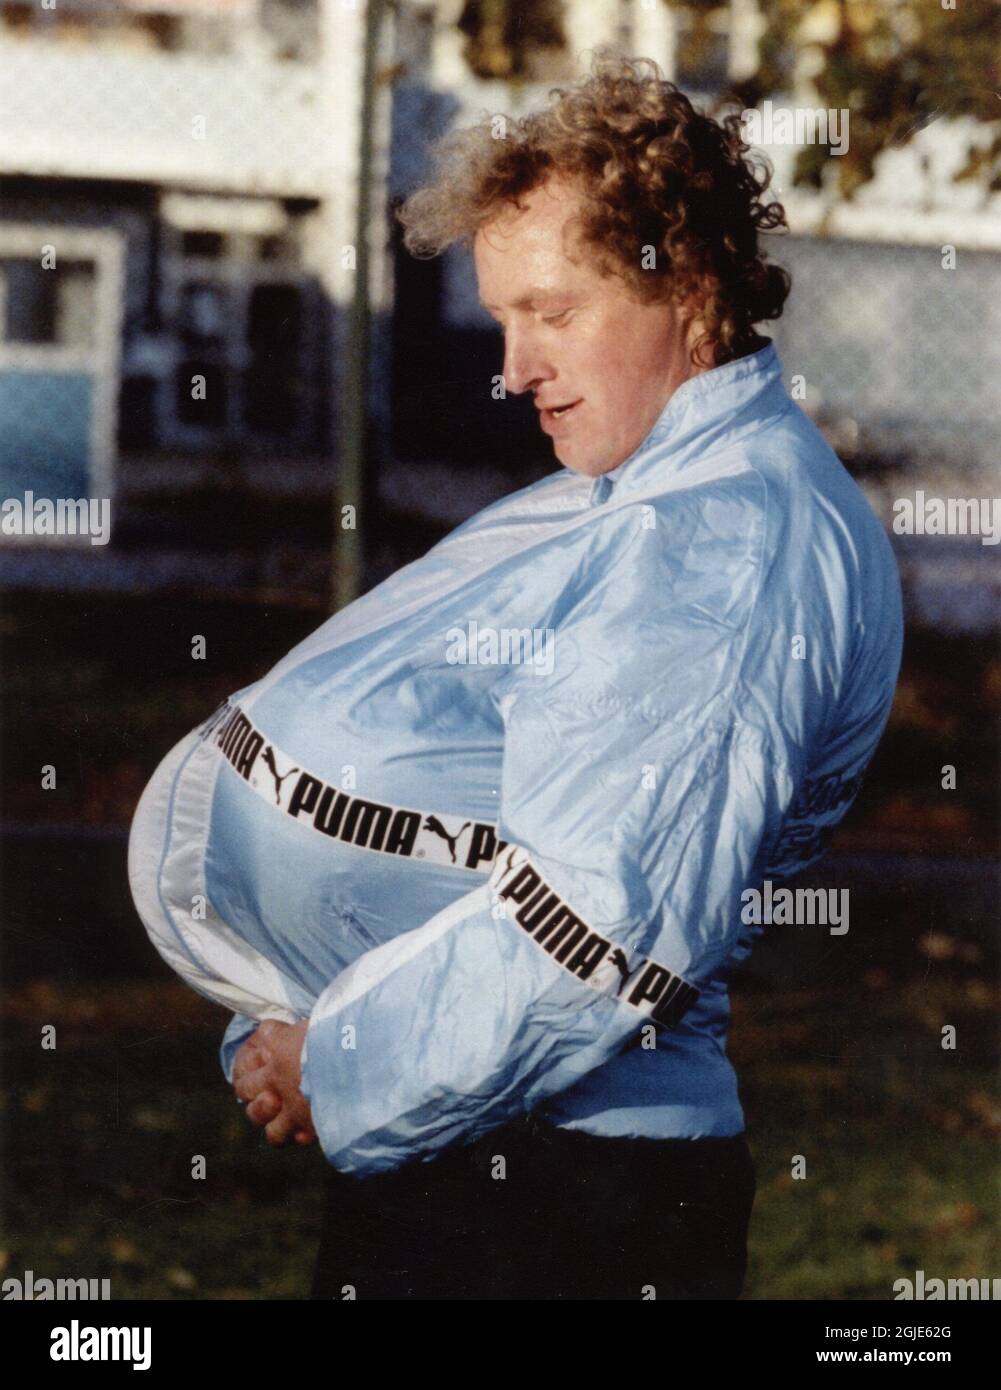 Robert Prytz of Malmo fooling around with footballs under his jacket  because he got criticized that he was too fat Stock Photo - Alamy